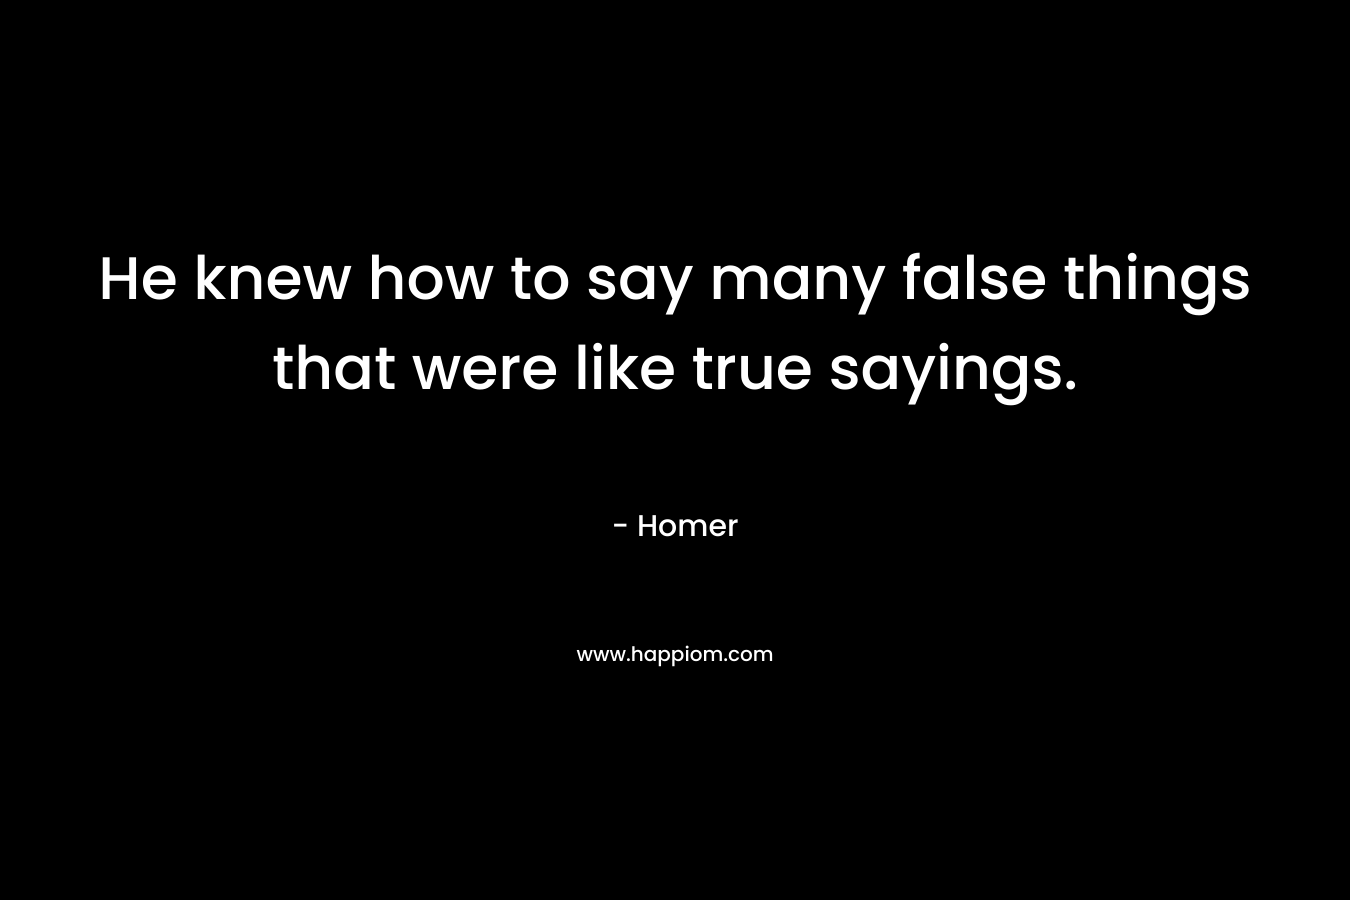 He knew how to say many false things that were like true sayings. – Homer